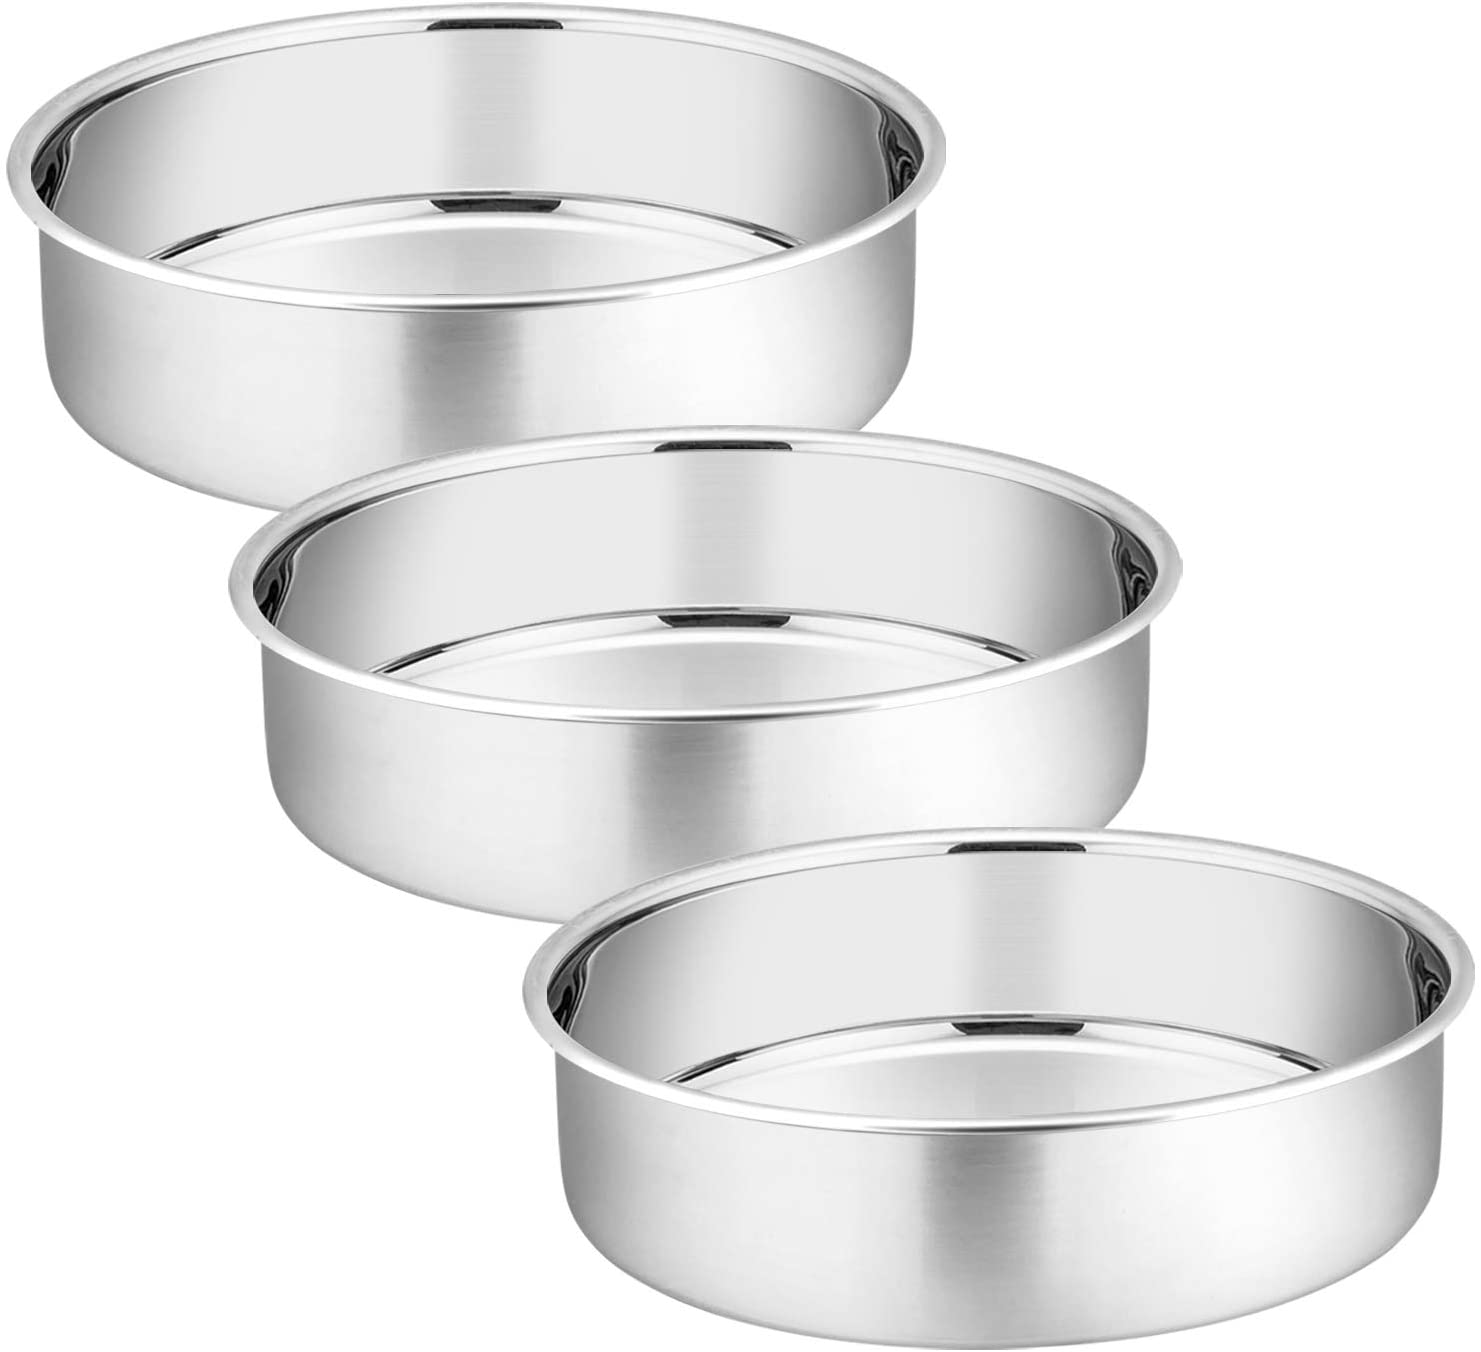 https://www.dontwasteyourmoney.com/wp-content/uploads/2022/04/pp-chef-round-cake-pans-stainless-steel-bakeware-3-piece-stainless-steel-bakeware.jpg